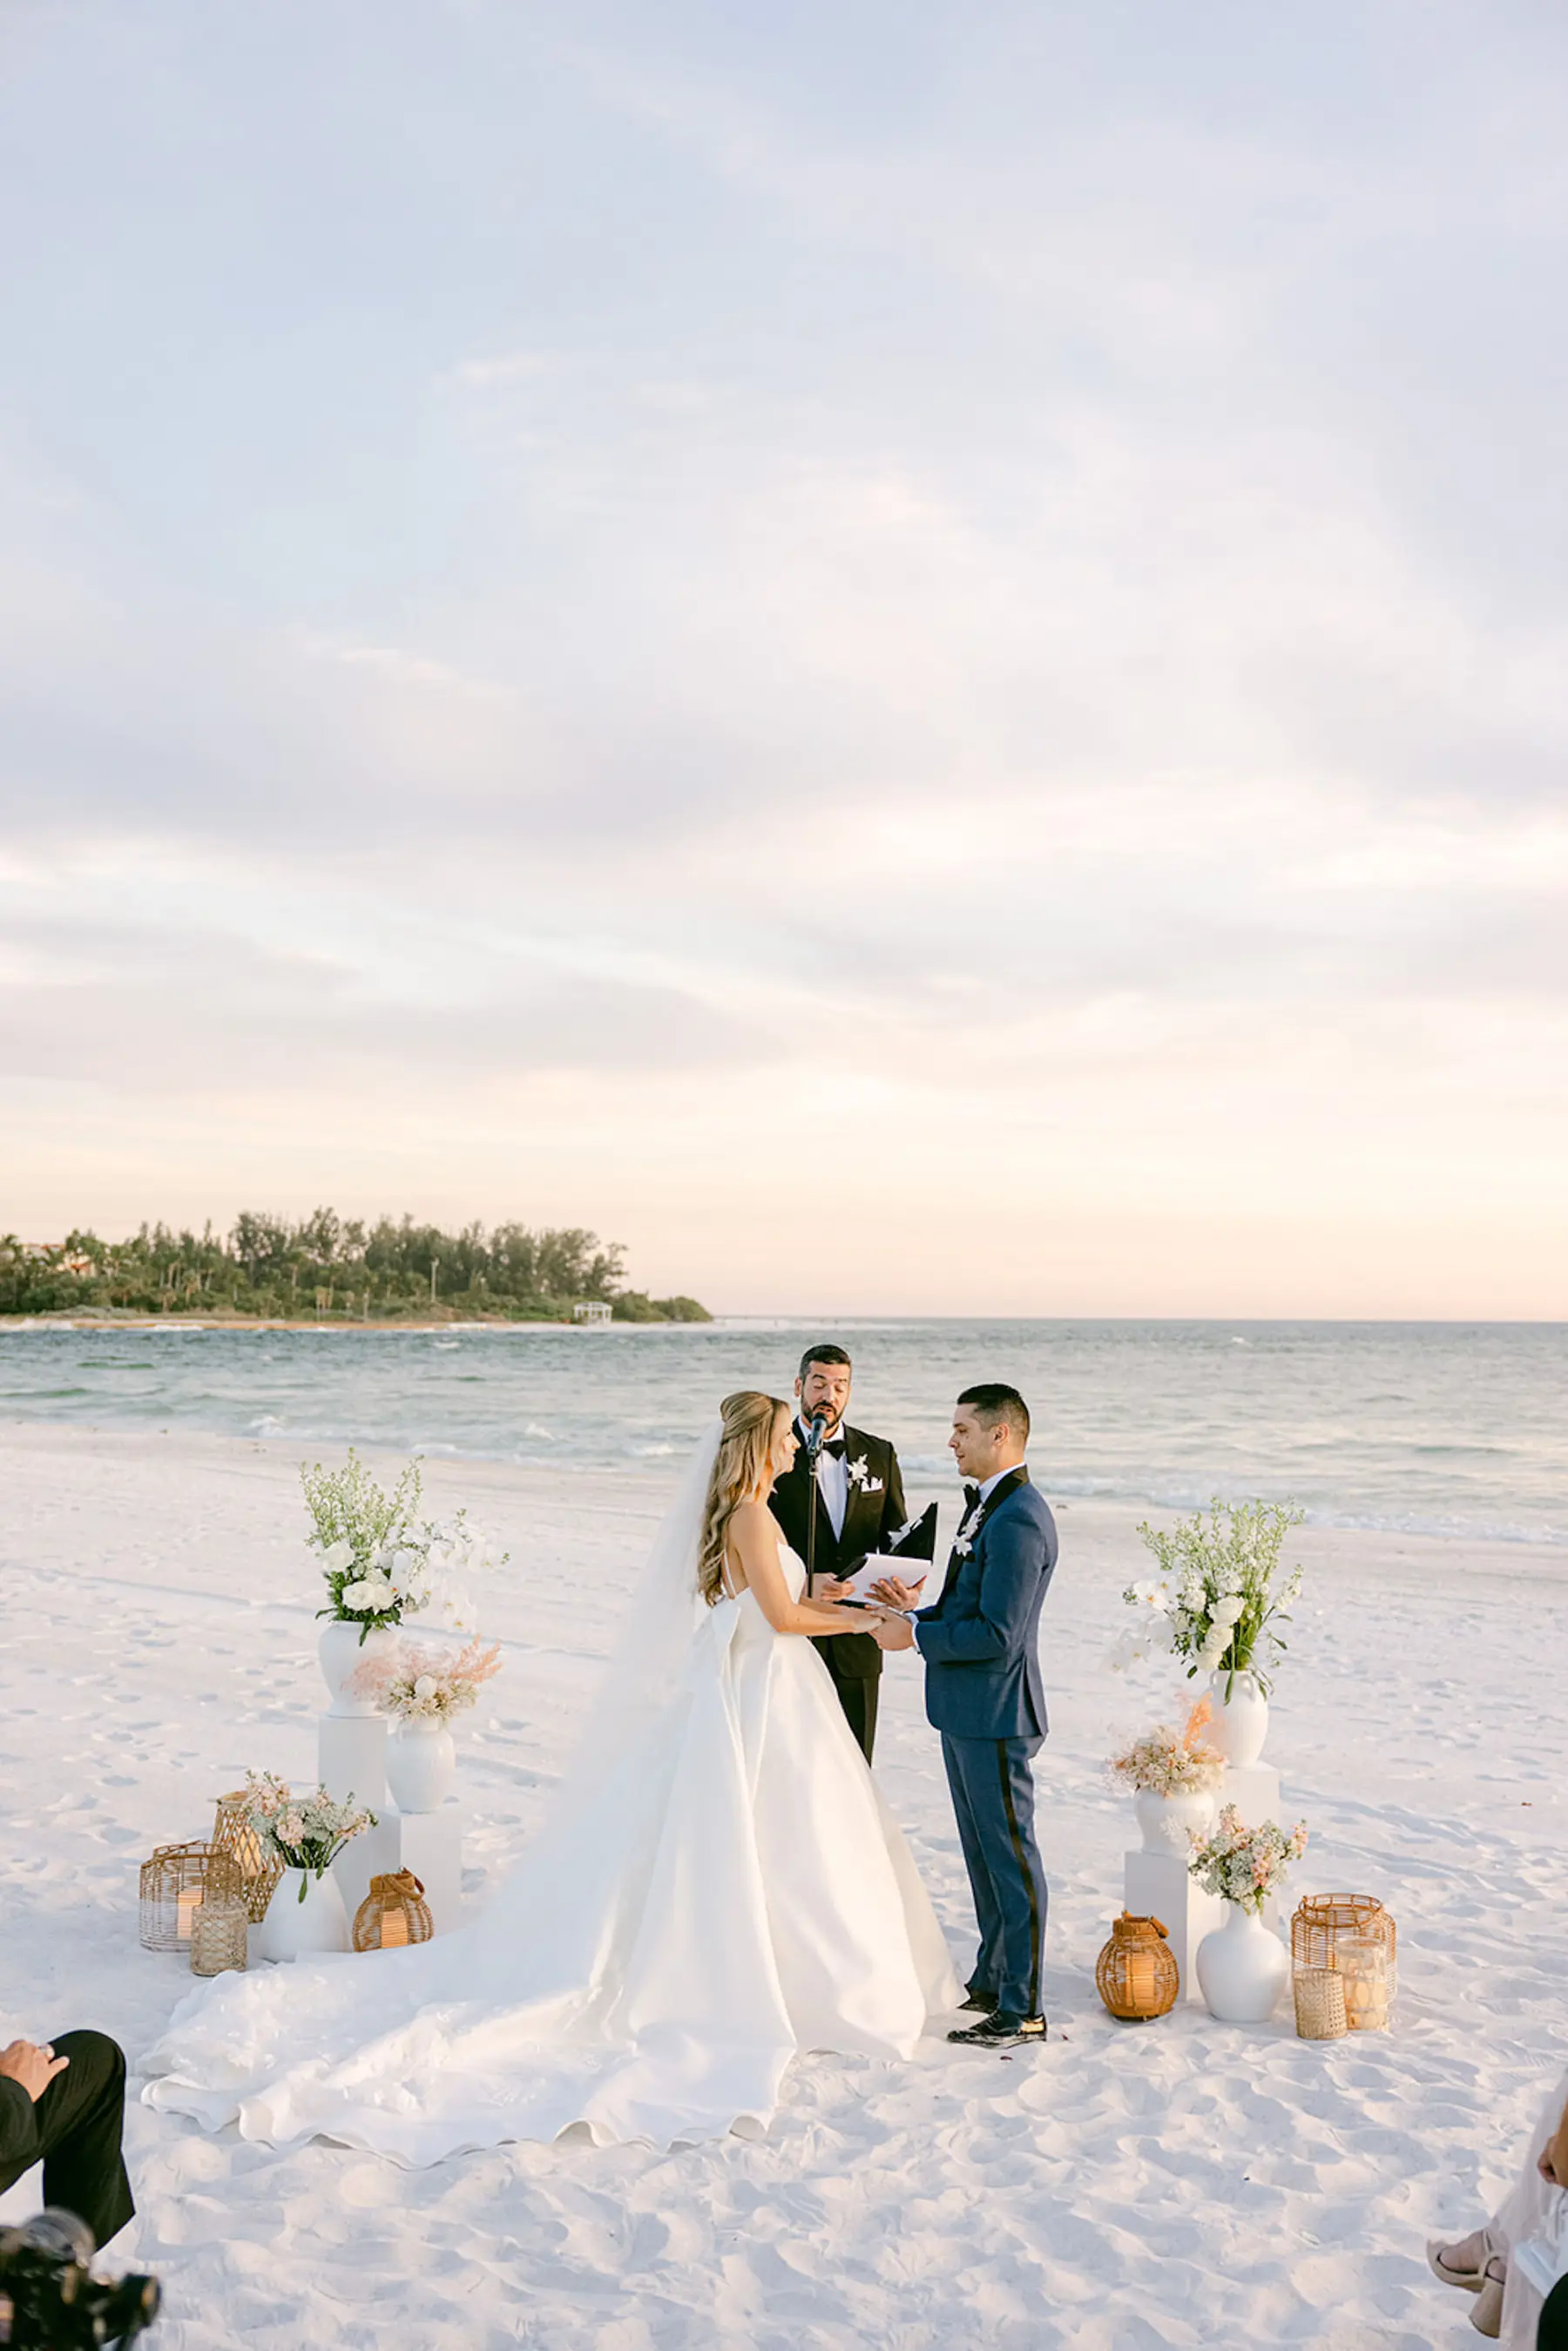 Bride and Groom Beach Wedding Ceremony Vow Exchange Inspiration | Sarasota Waterfront Beach Venue The Resort at Longboat Key Club | Planner Elegant Affairs by Design